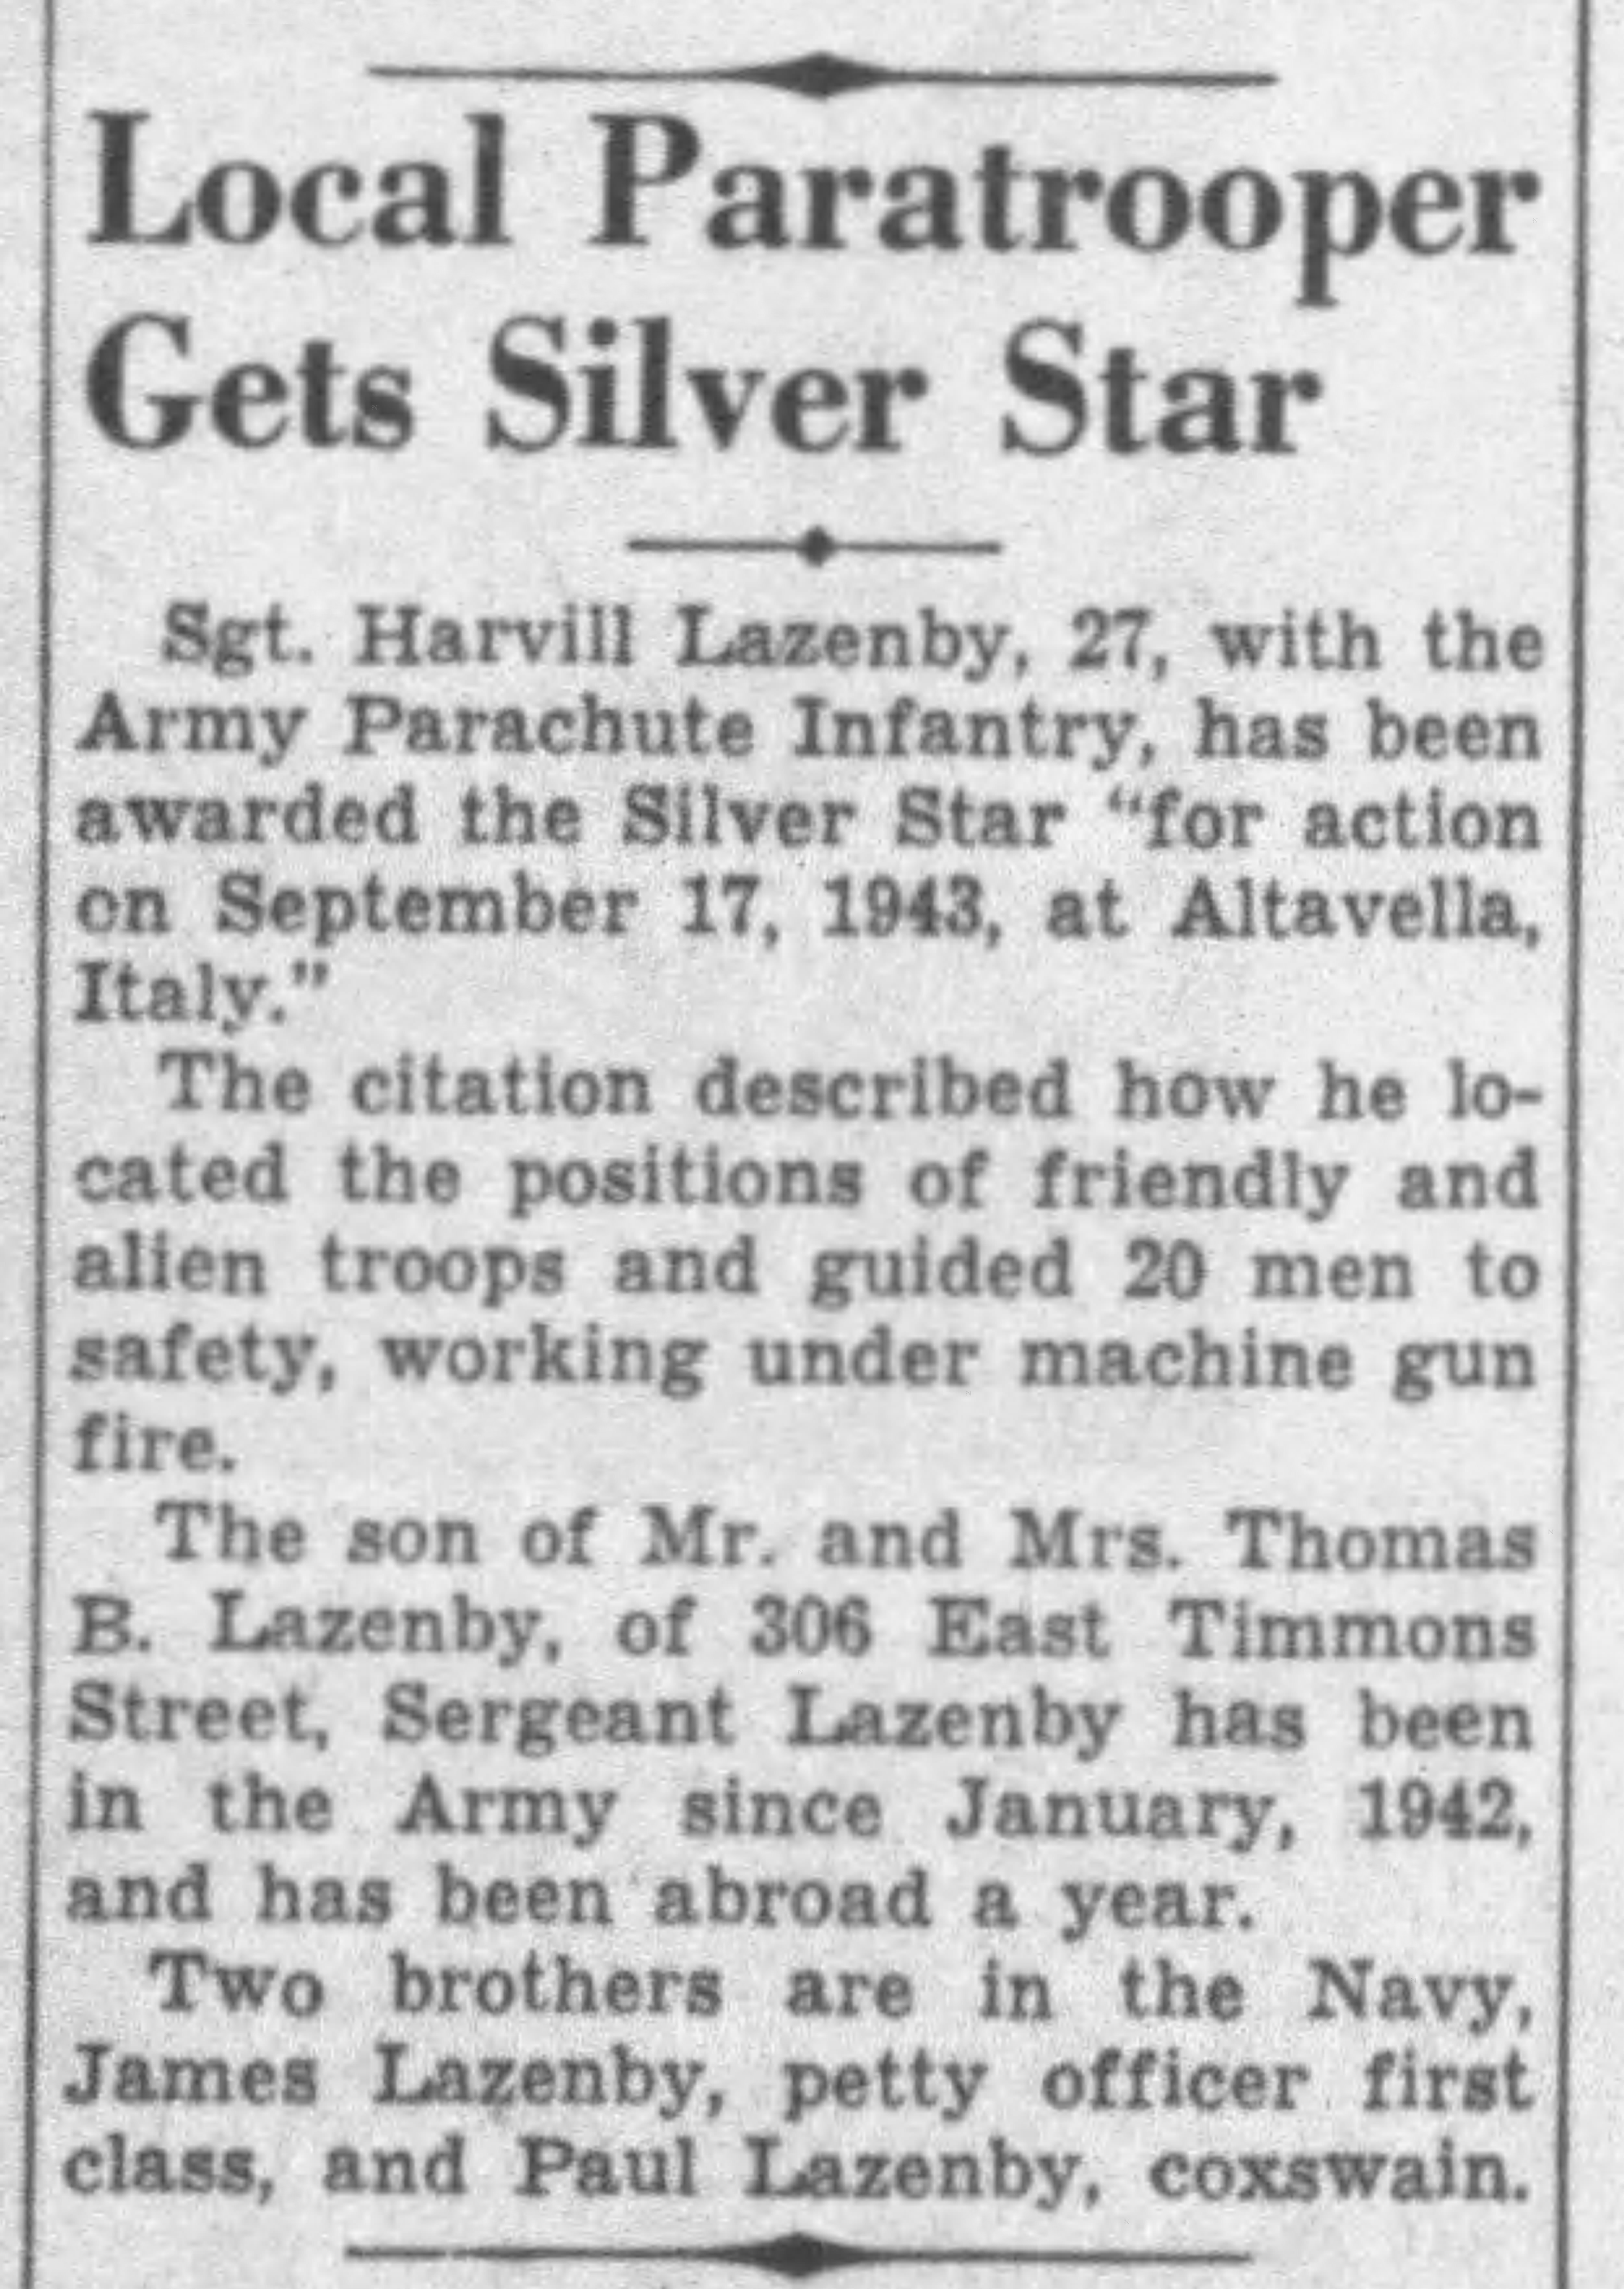 Sgt. Harvill's Silver Star medal news article.